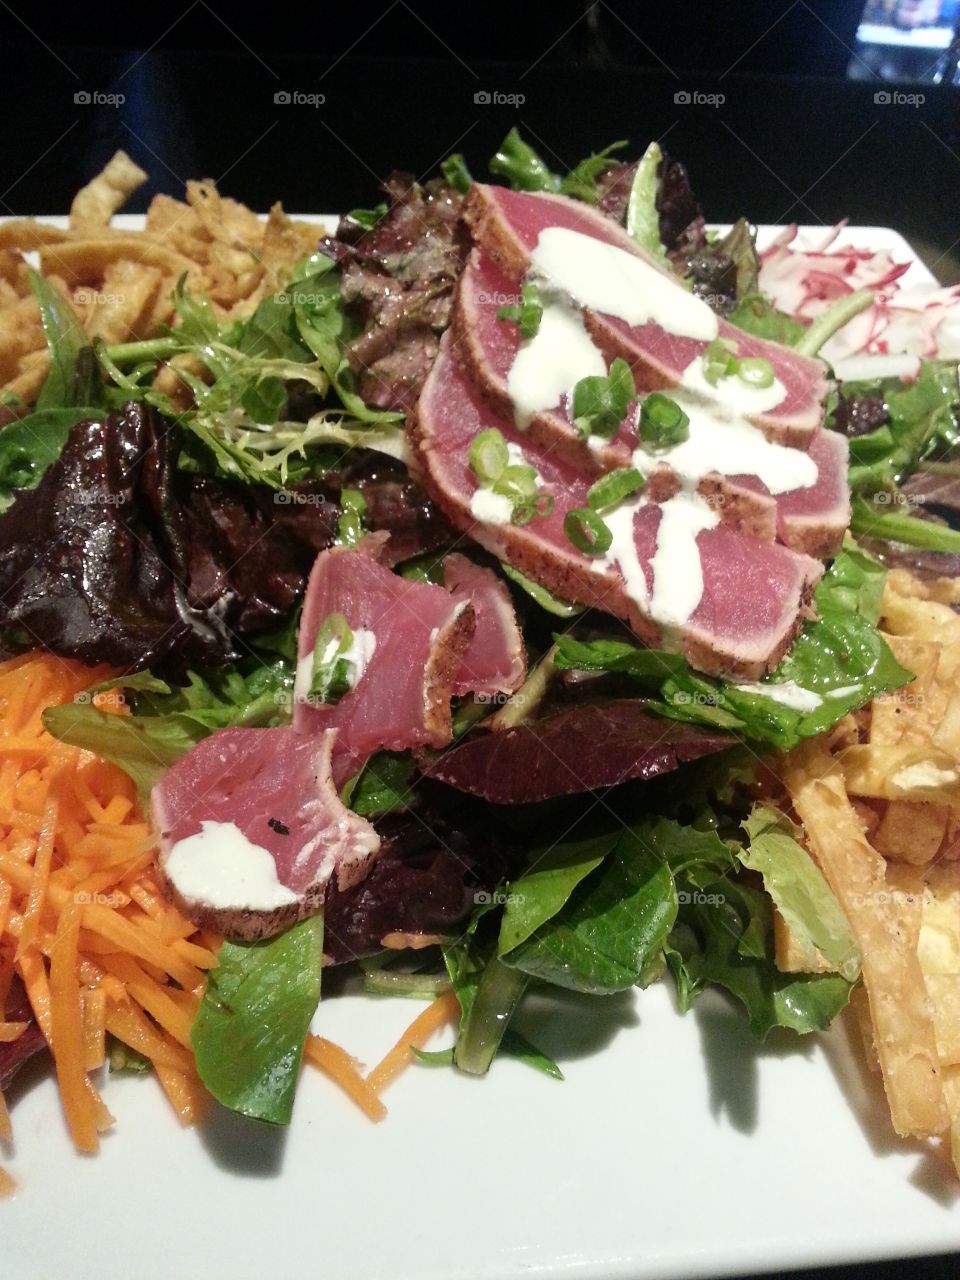 Impressive Ahi Tuna Salad - Delicious Looking Healthy Meal - Lighter Fare Food for Lunch or Dinner 